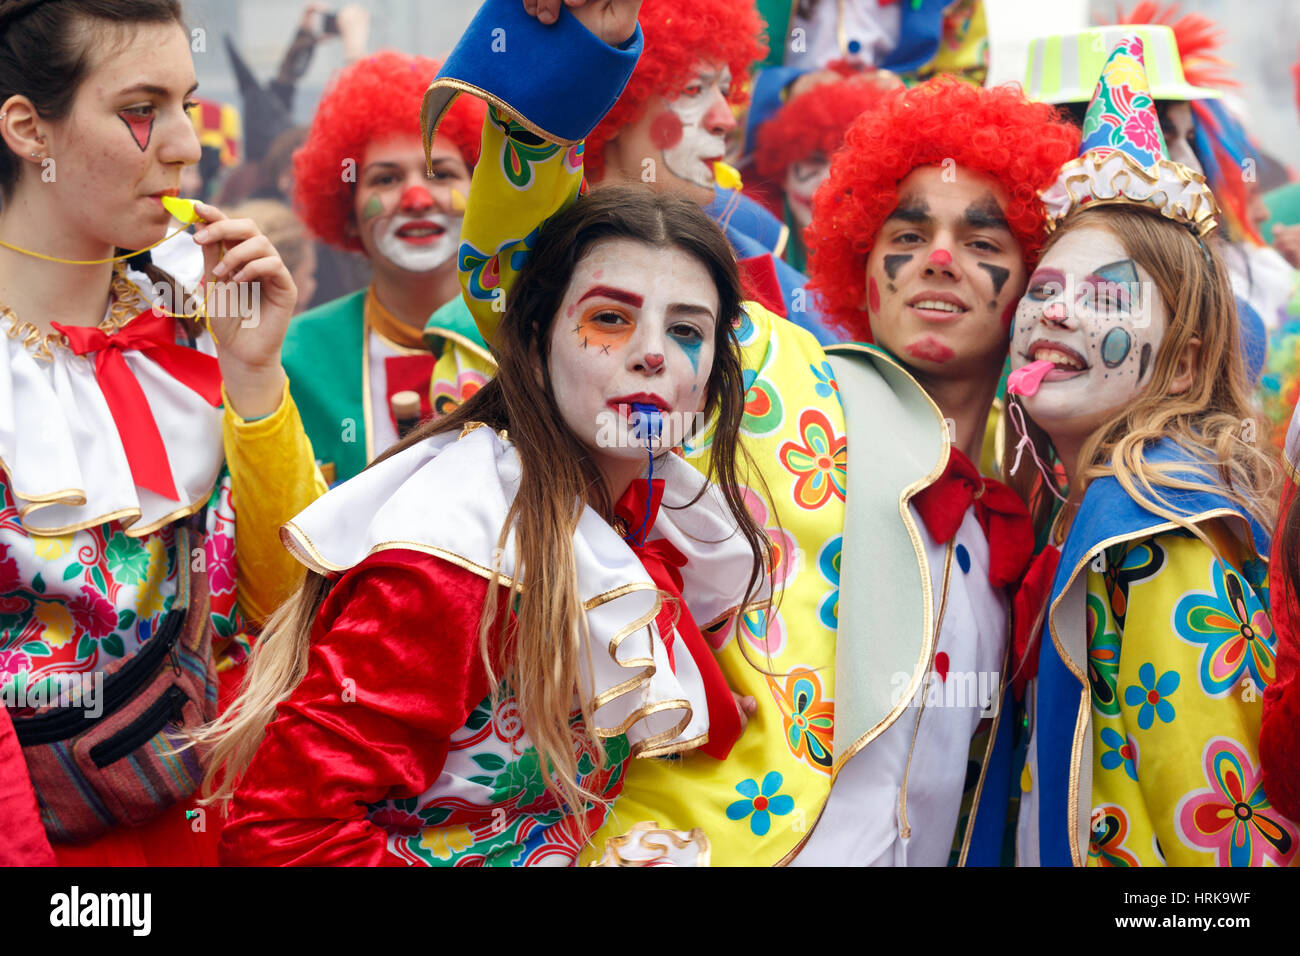 Xanthi, Greece - February 26,2017: People dressed in colorful costumes  during the annual carnival parade in Xanthi, Greece.The event is very  popular a Stock Photo - Alamy